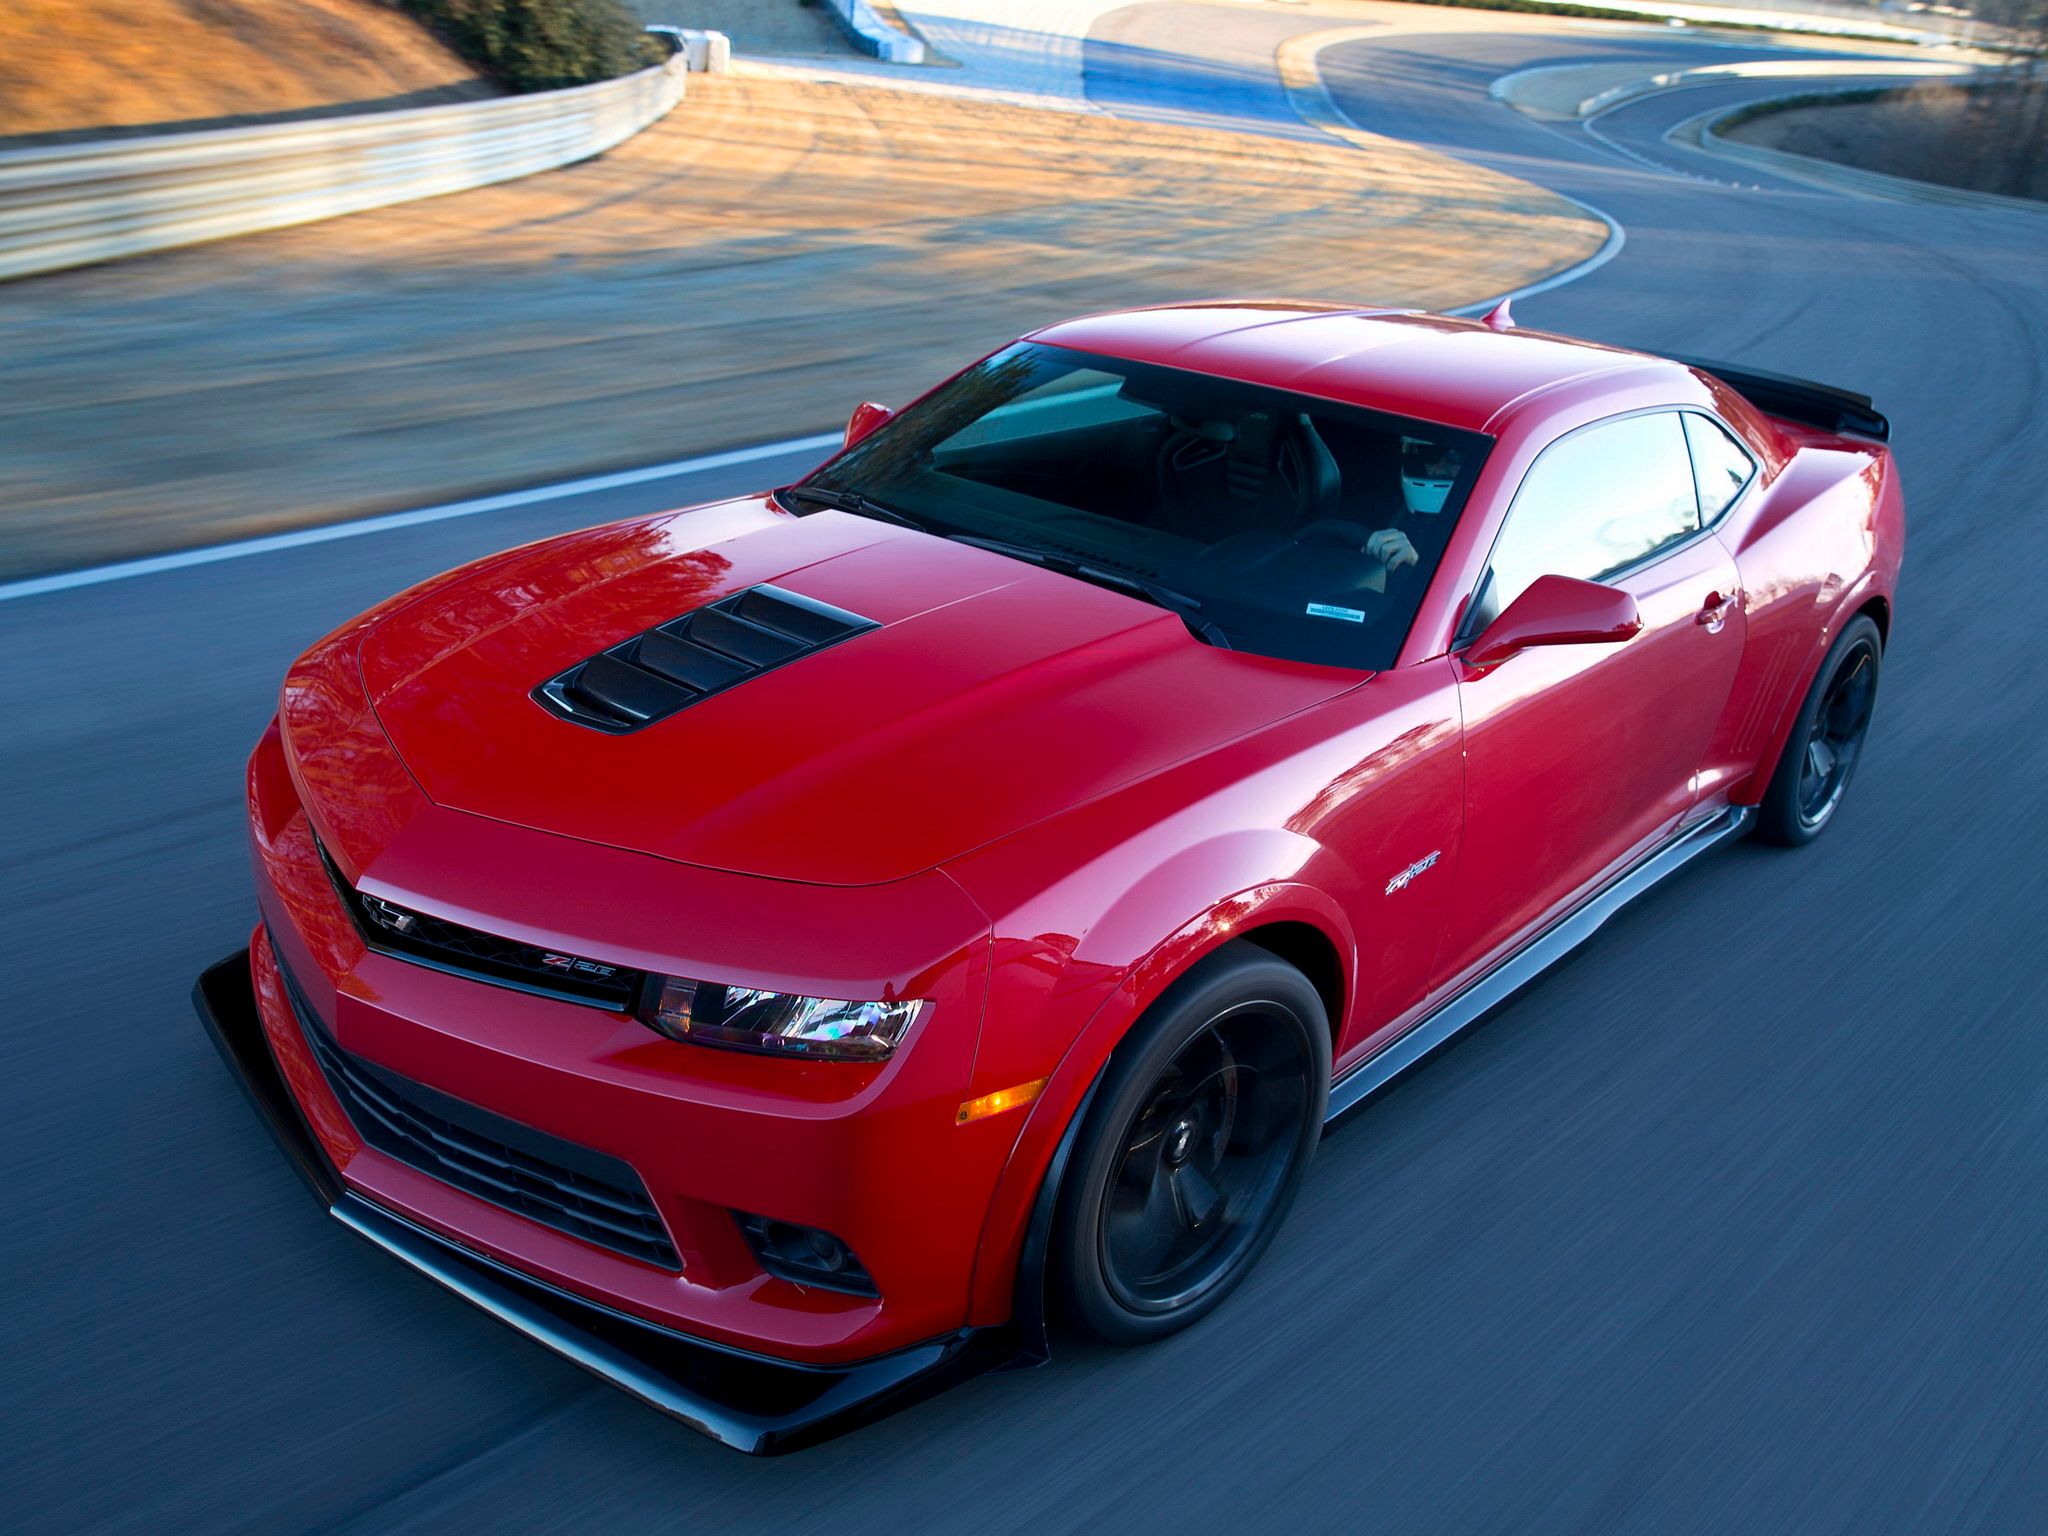 2014 Chevrolet Camaro Z/28 Sold Out For 2014